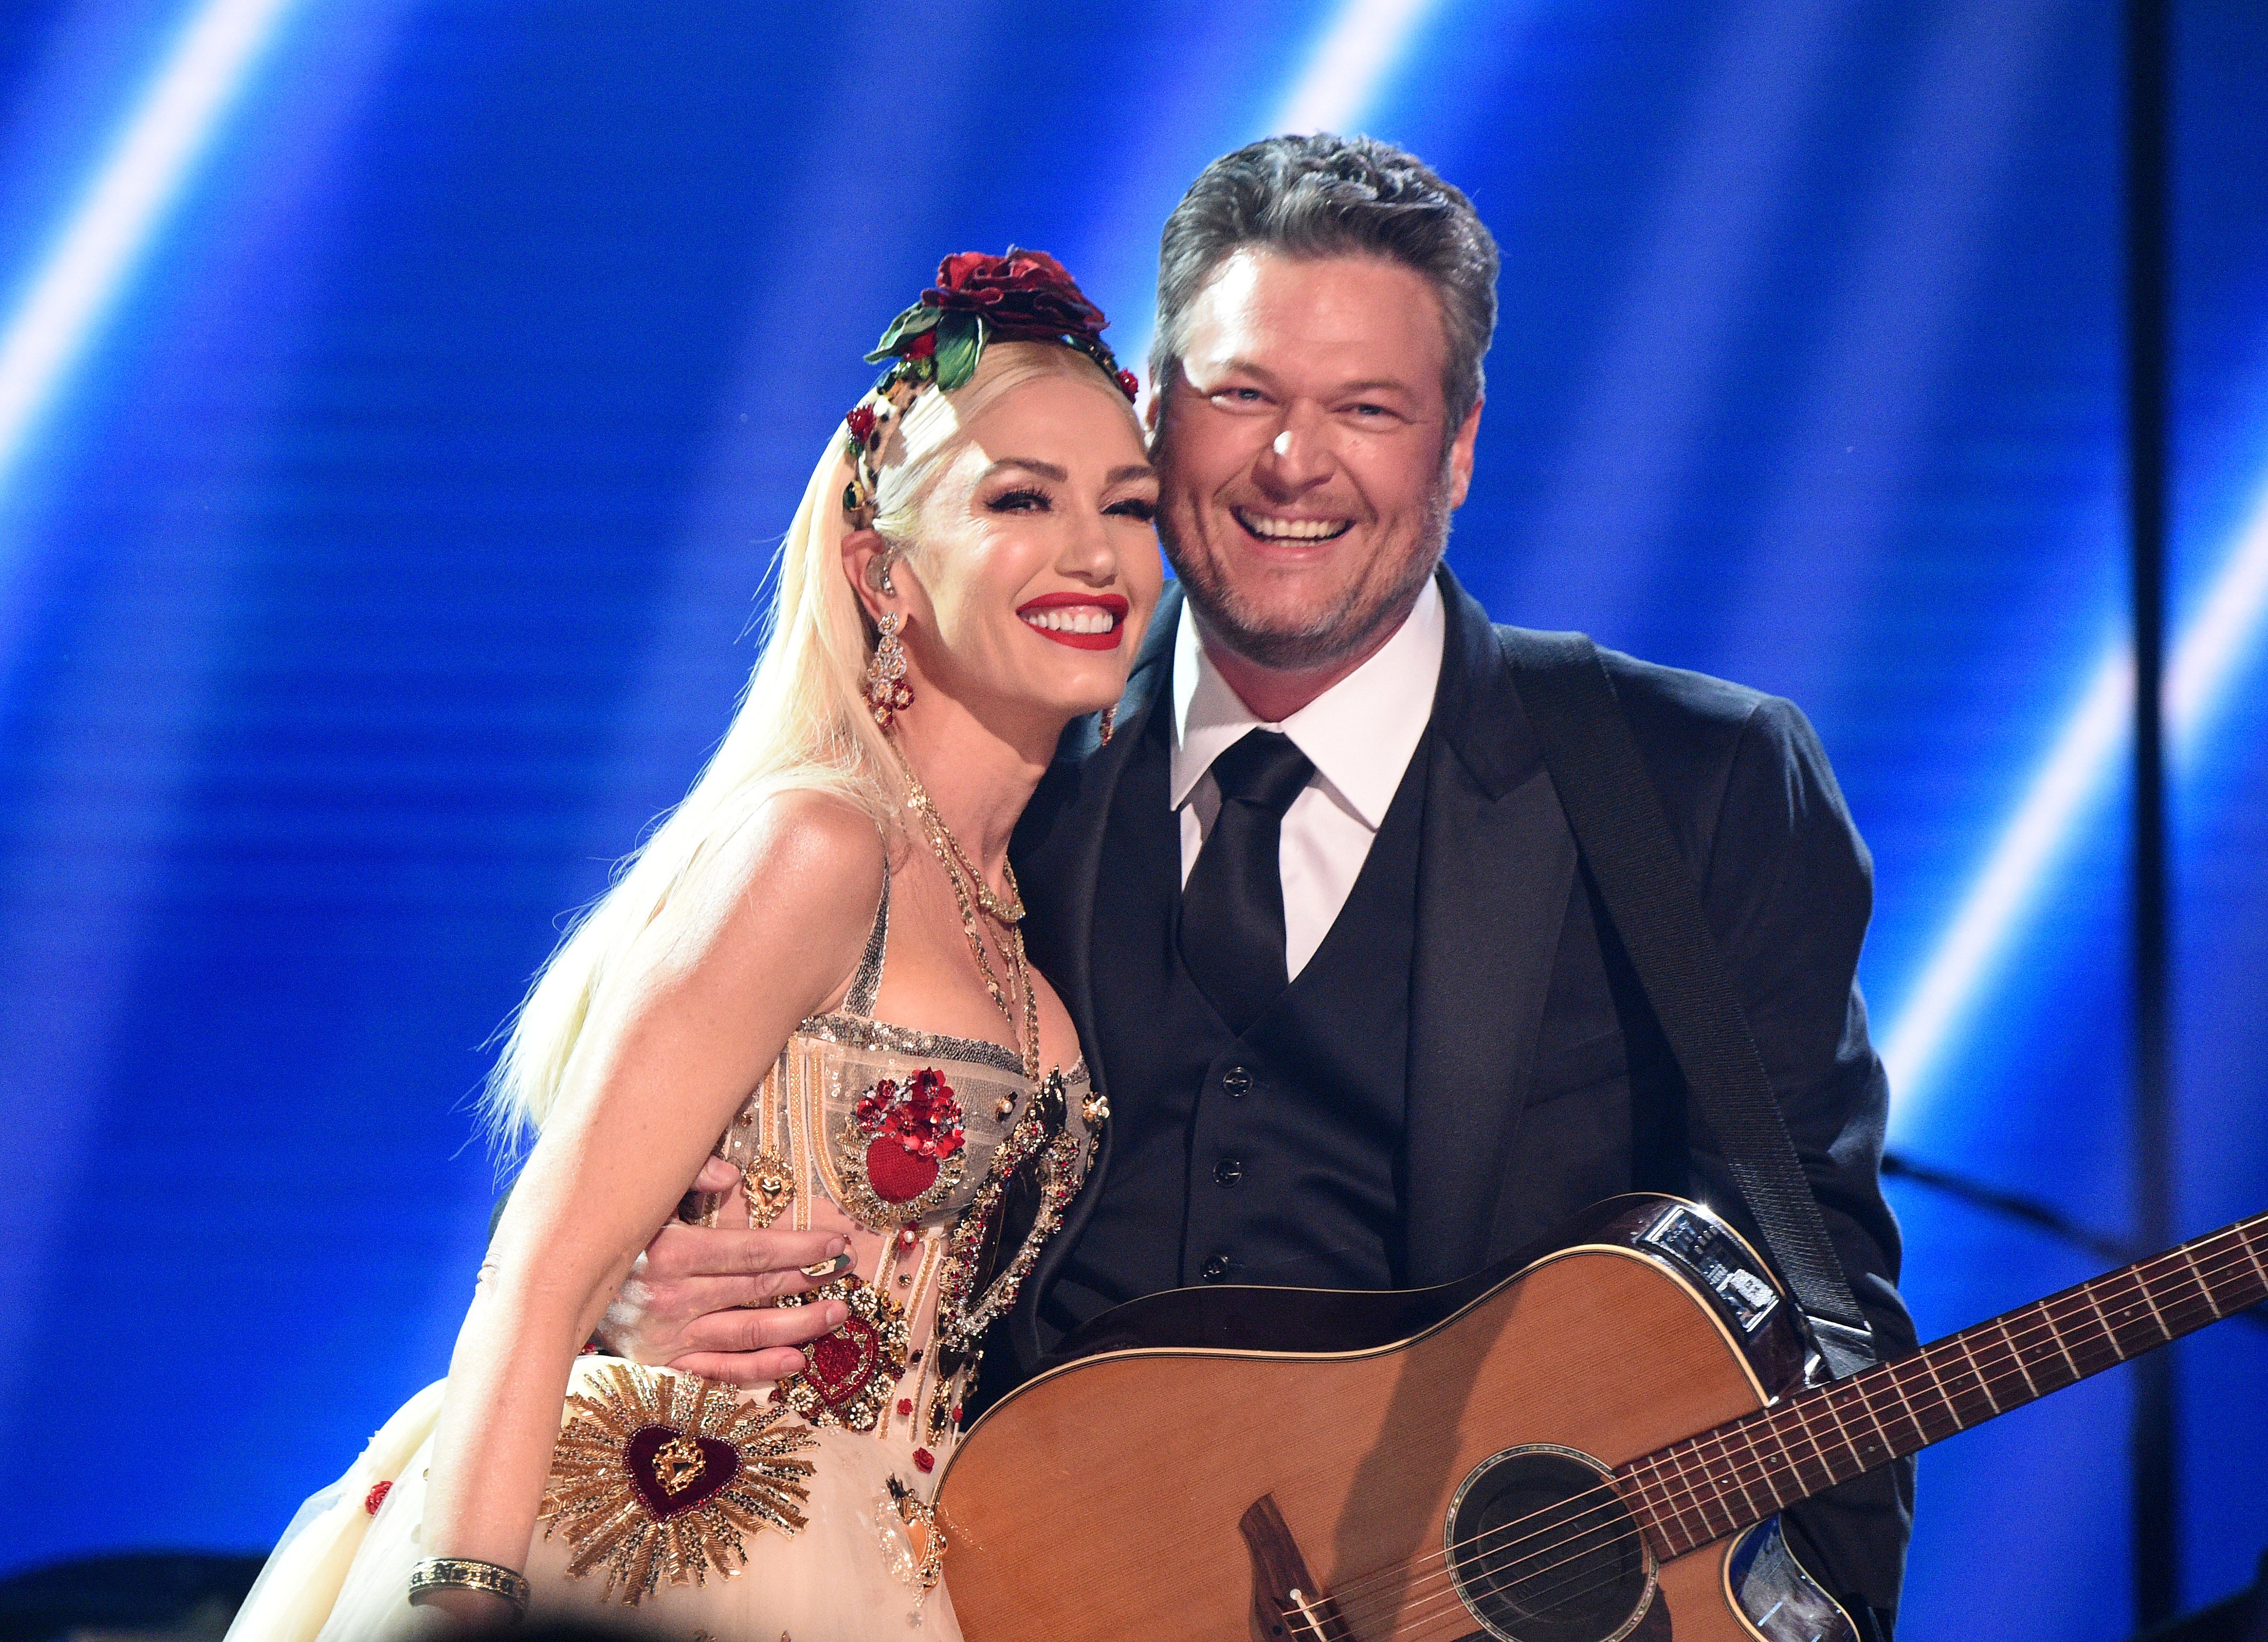 Gwen Stefani and Blake Shelton posed together onstage, 2020. |Photo: Getty Images